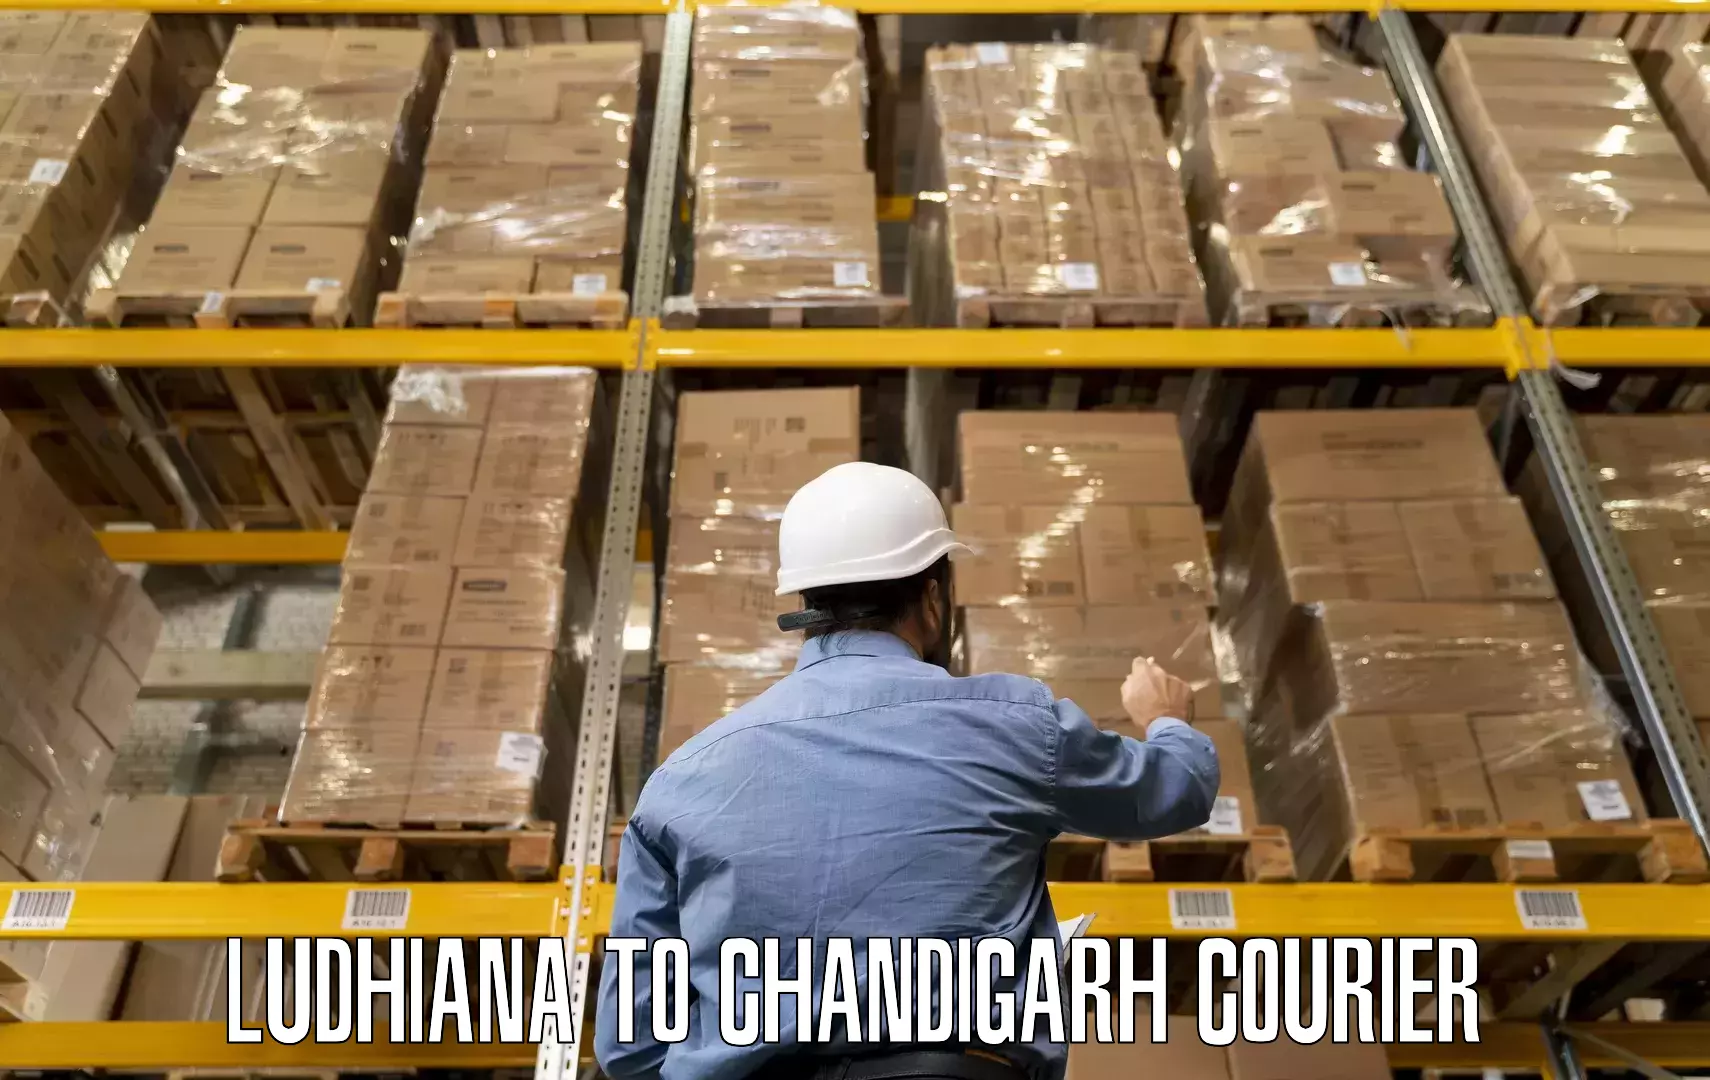 Furniture moving specialists Ludhiana to Chandigarh